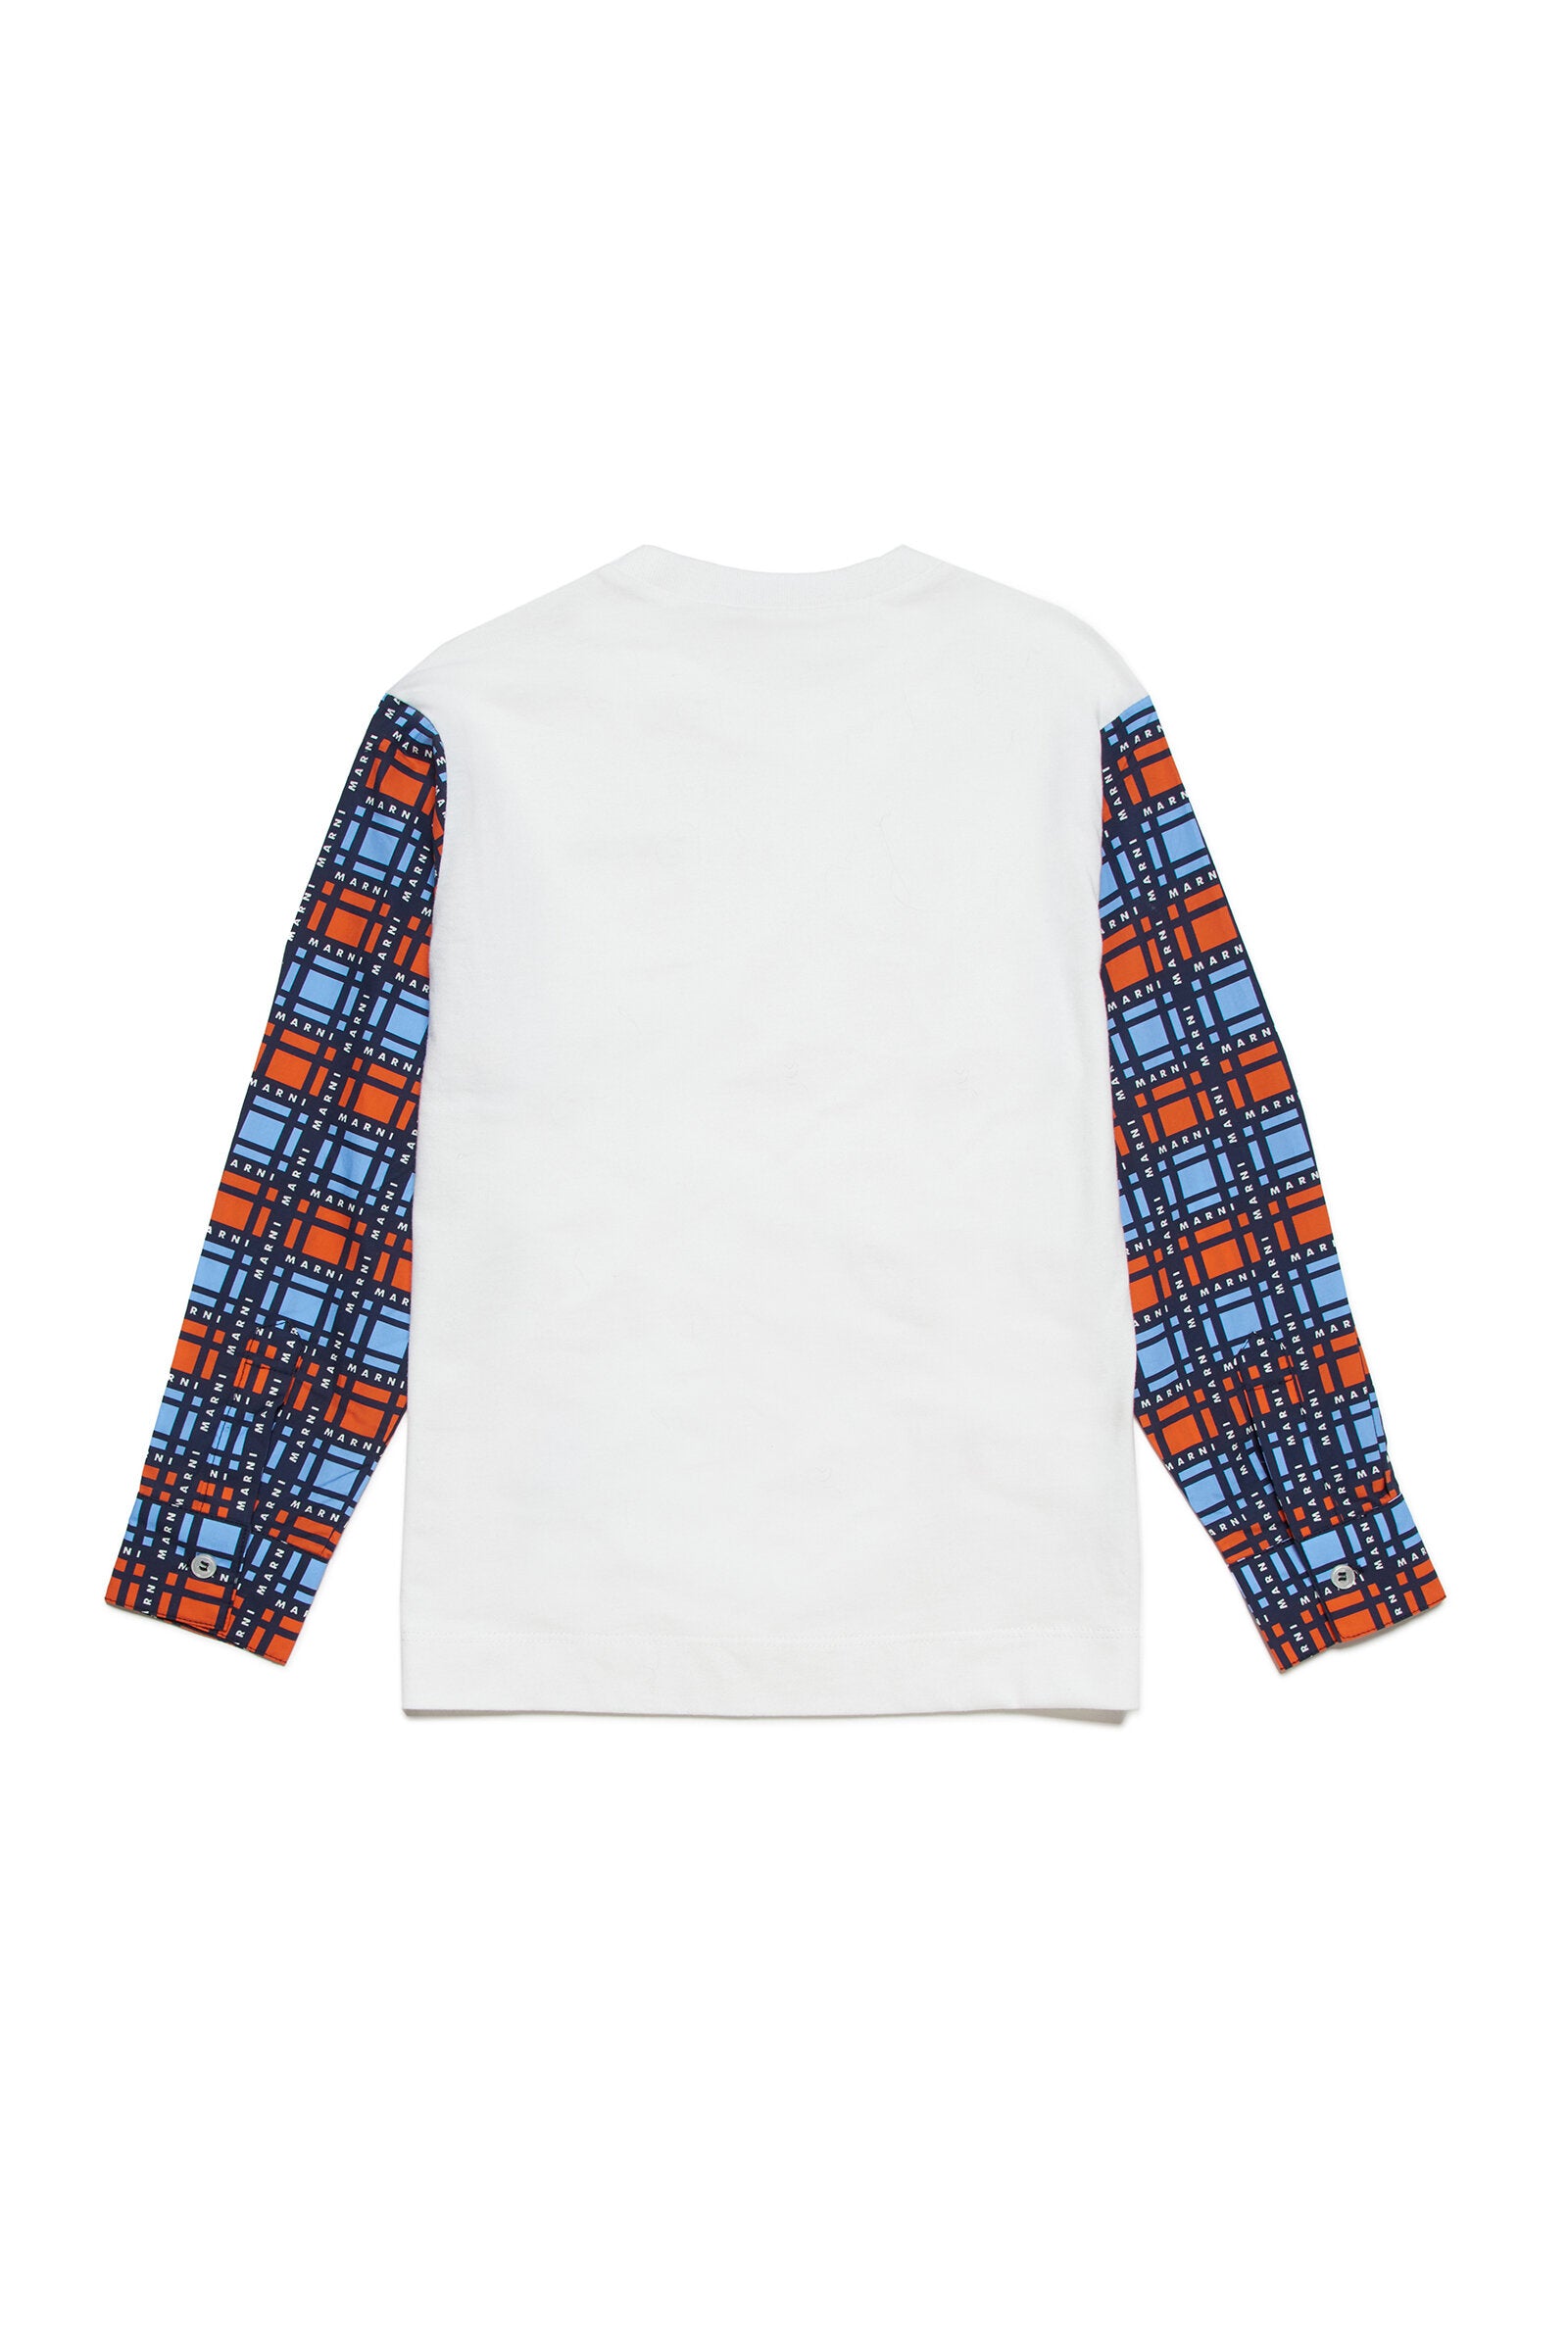 Crew-neck jersey t-shirt with Check pattern poplin sleeves